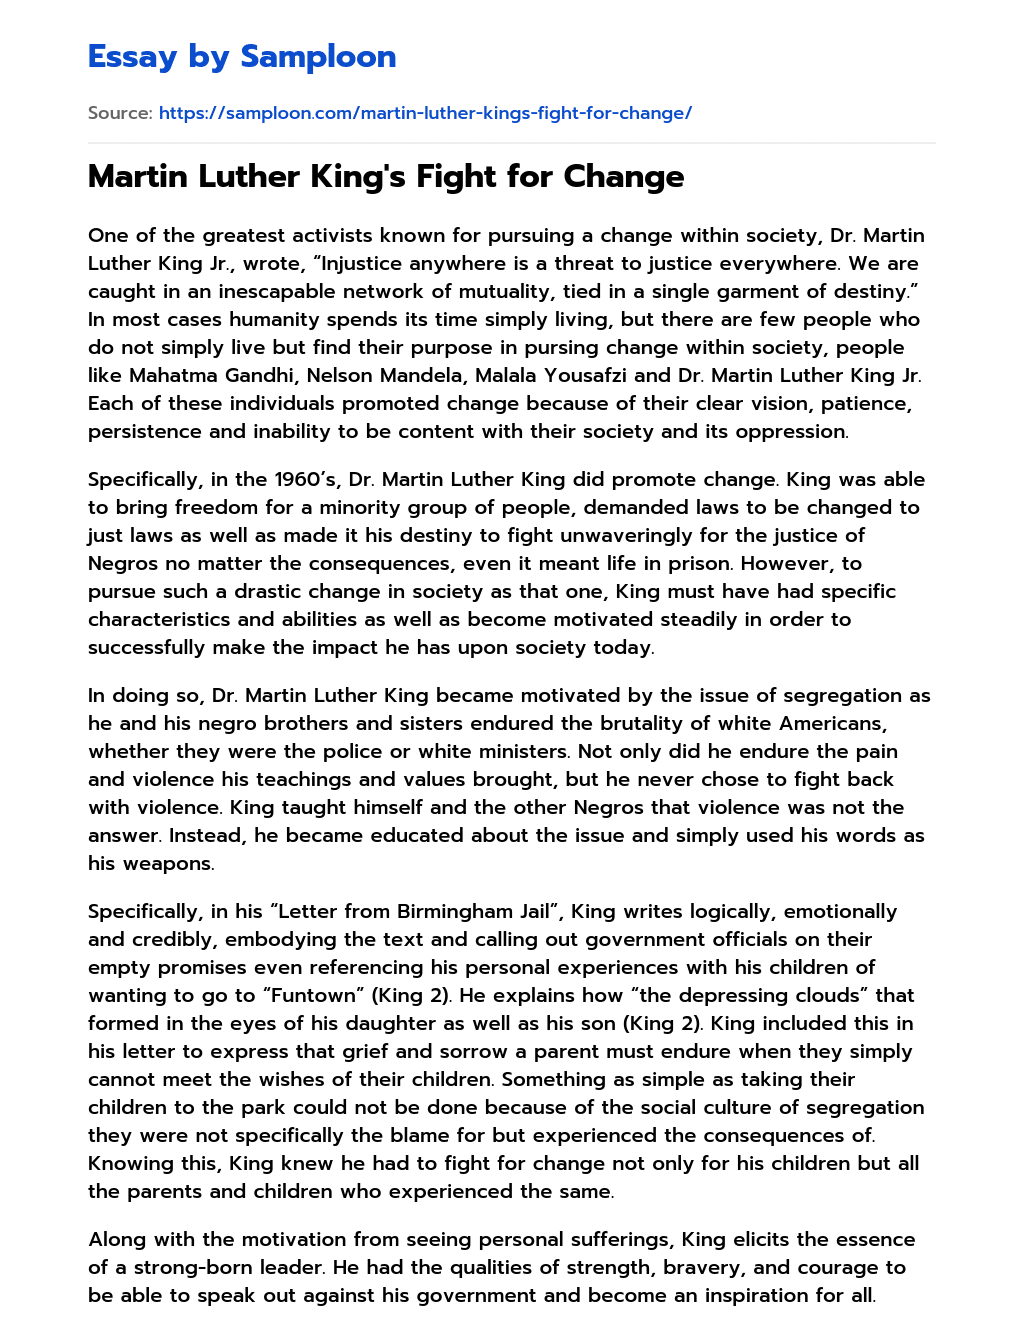 Martin Luther King’s Fight for Change essay